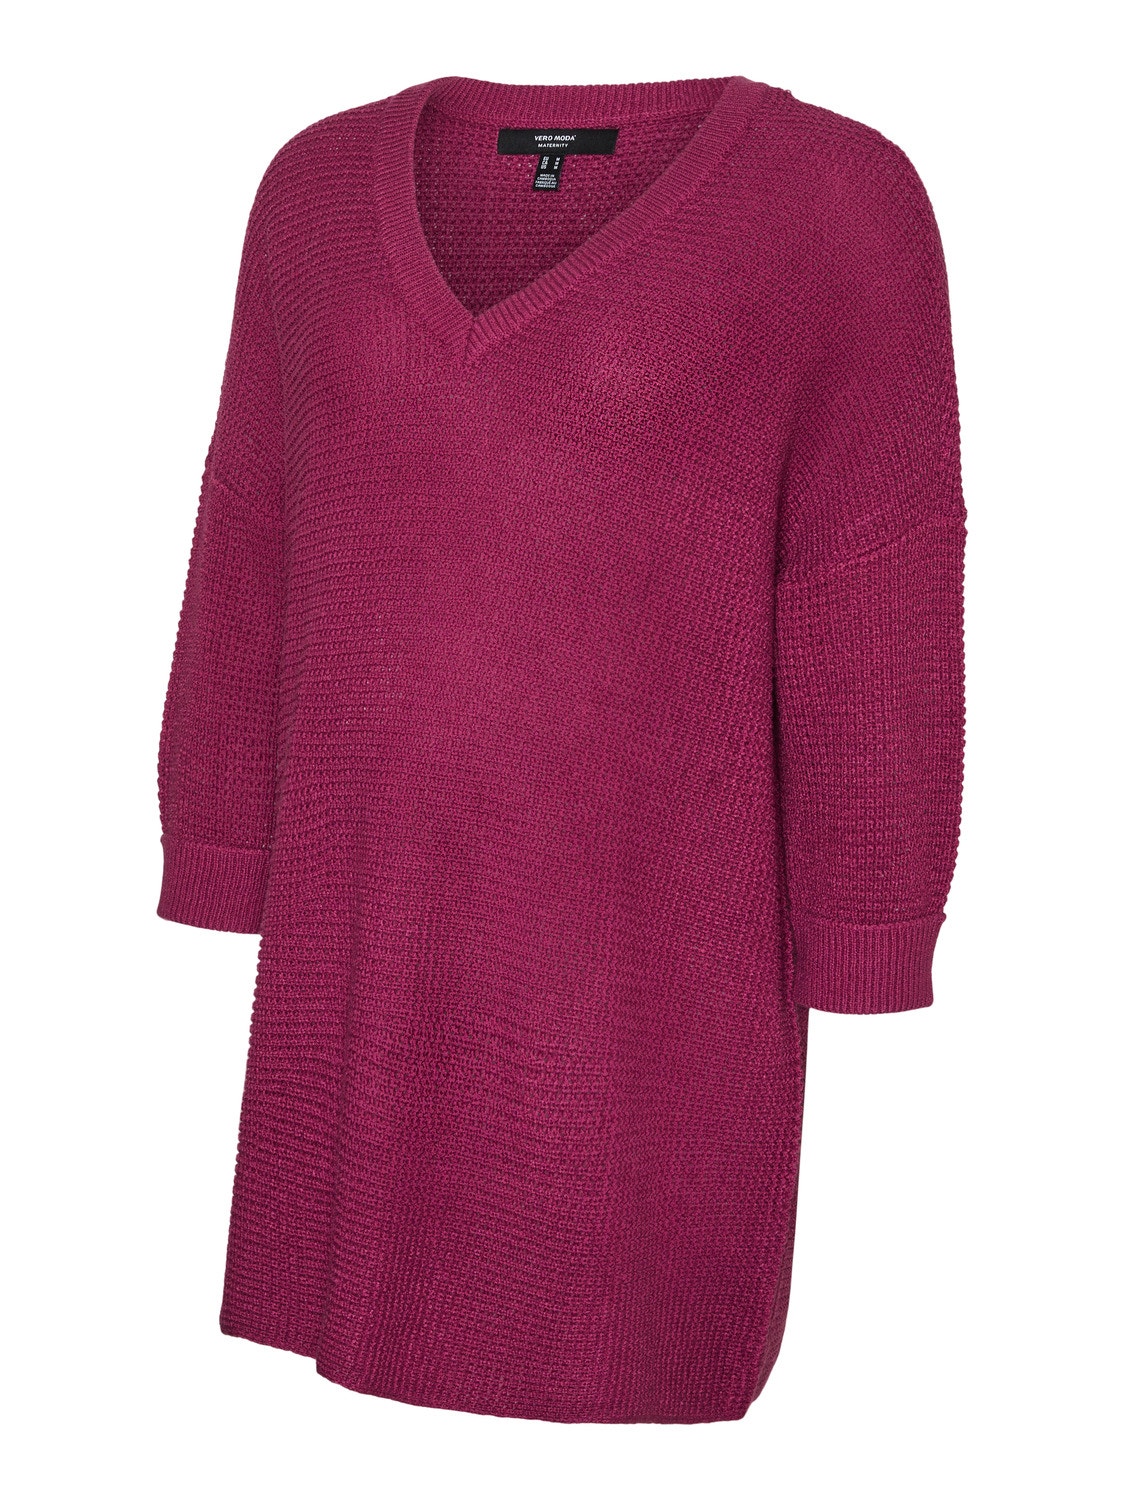 MAMA.LICIOUS Umstands-strickpullover -Boysenberry - 20019703